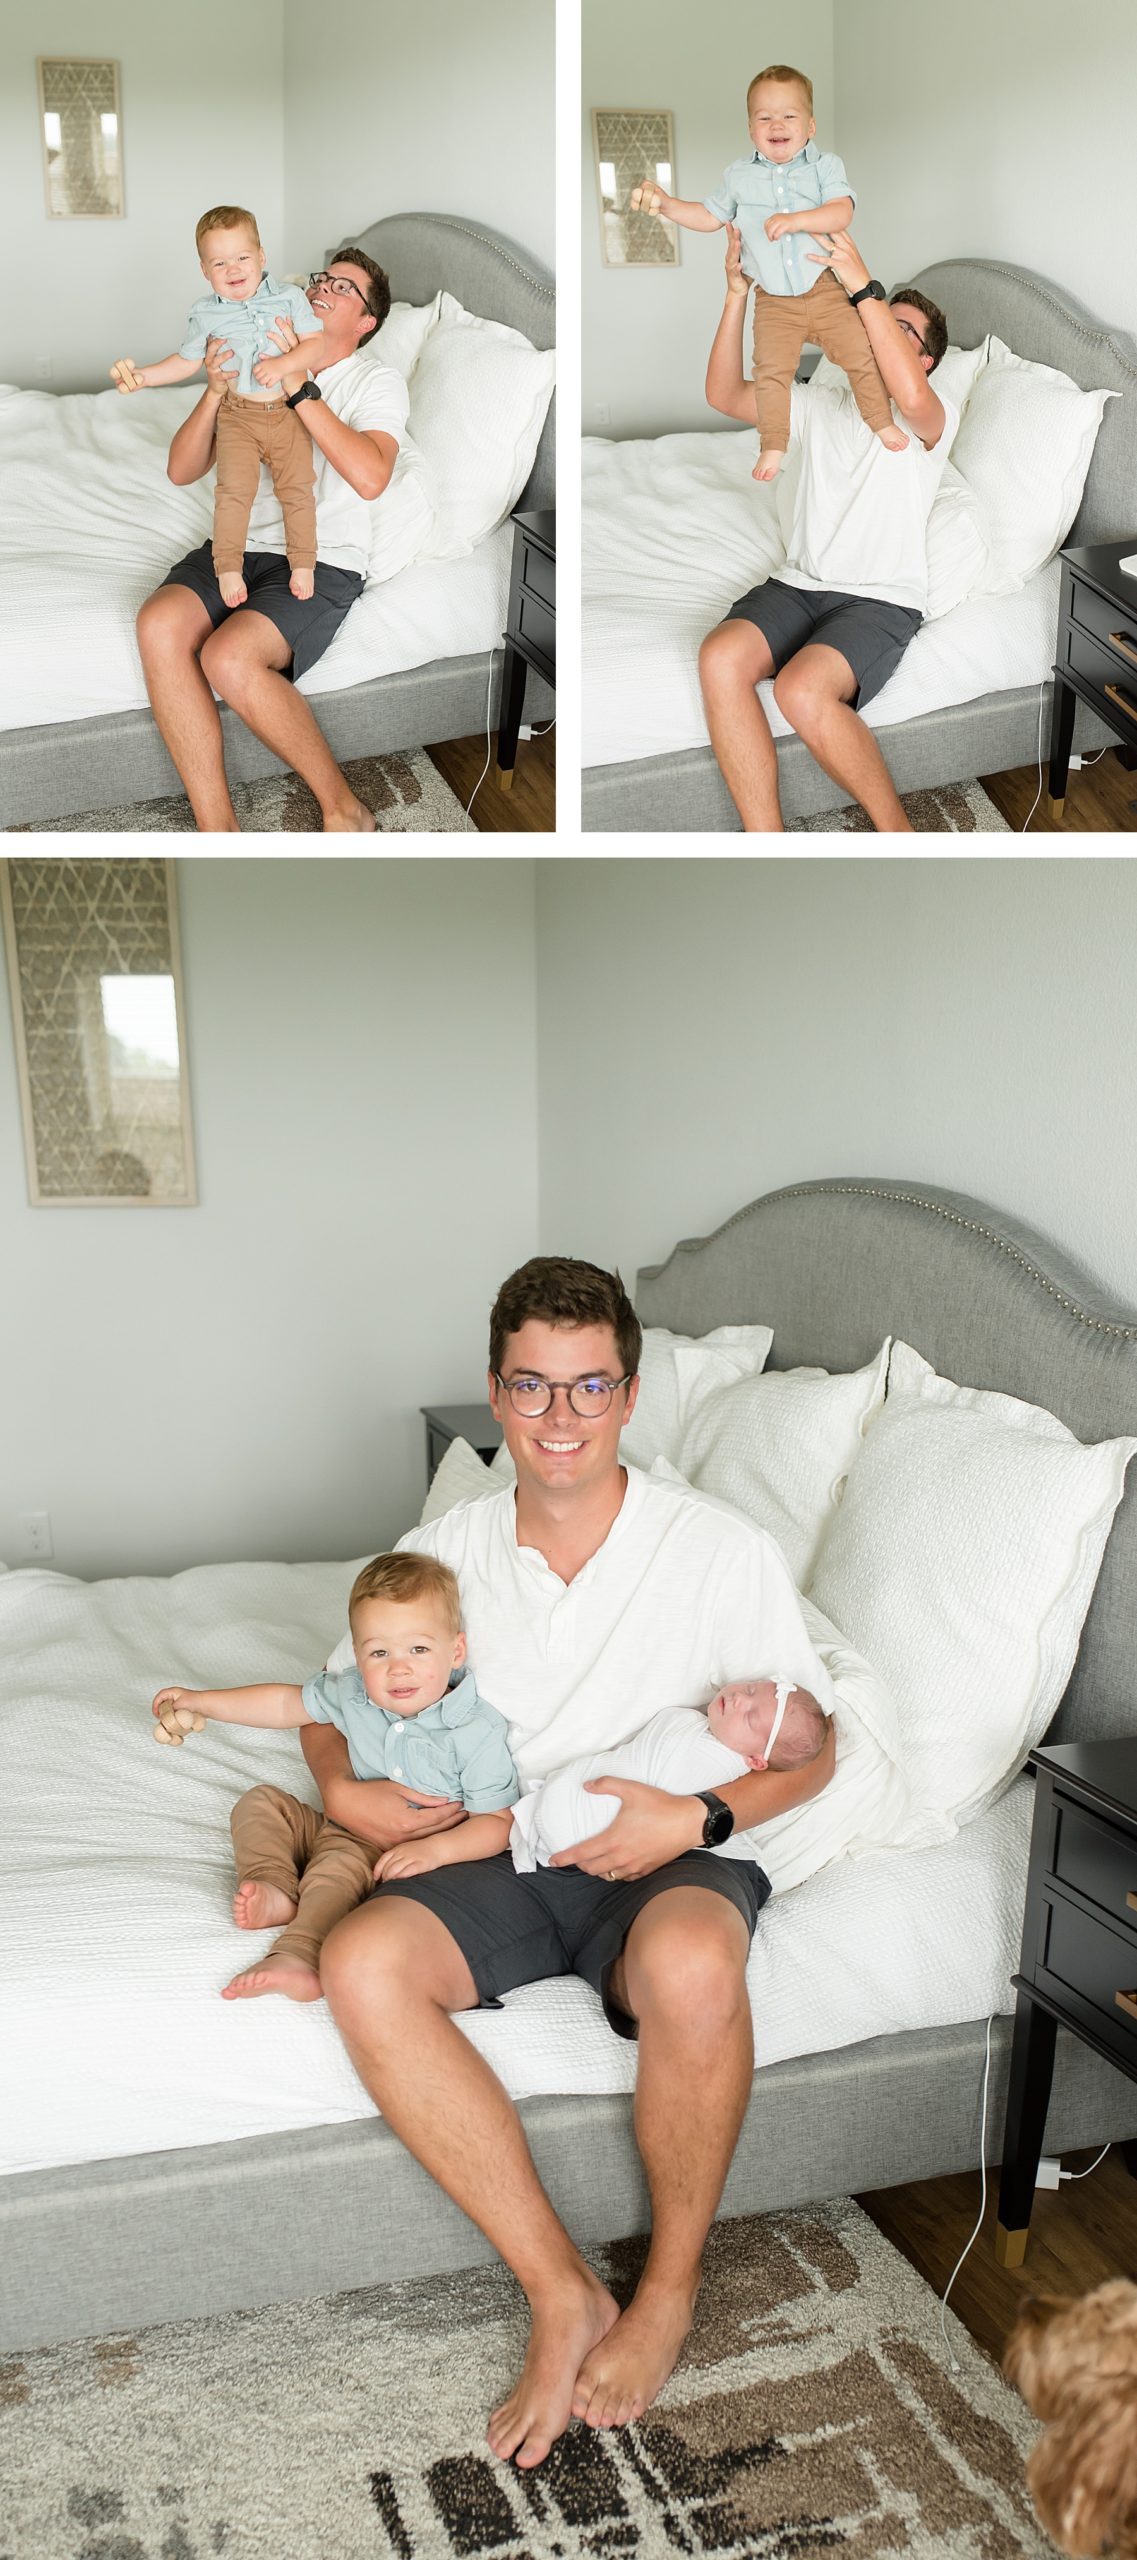 In-Home Newborn Session with family in Dallas | Lindsey Dutton Photography | newborn photos, family photos at home, neutral family outfits | via lindseyduttonphotography.com